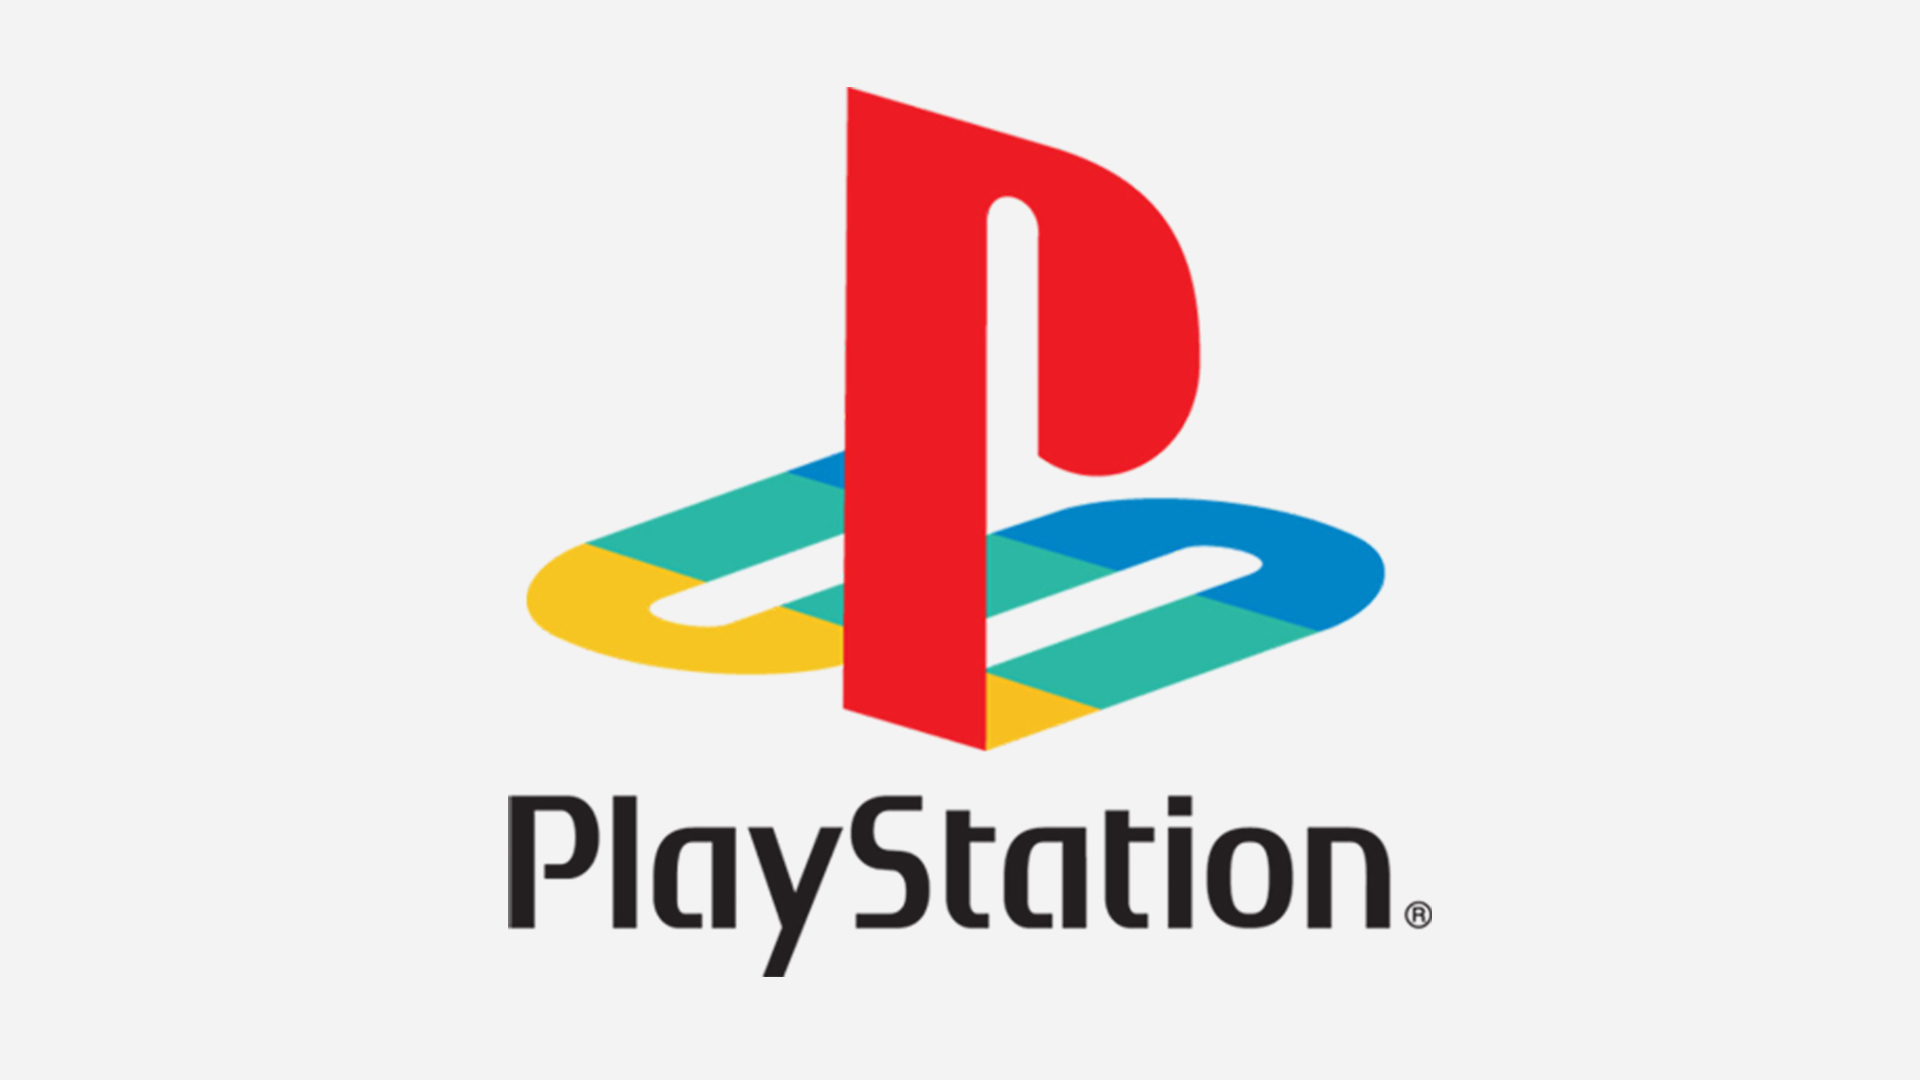 PlayStation logo from behind is the most cursed | Creative Bloq